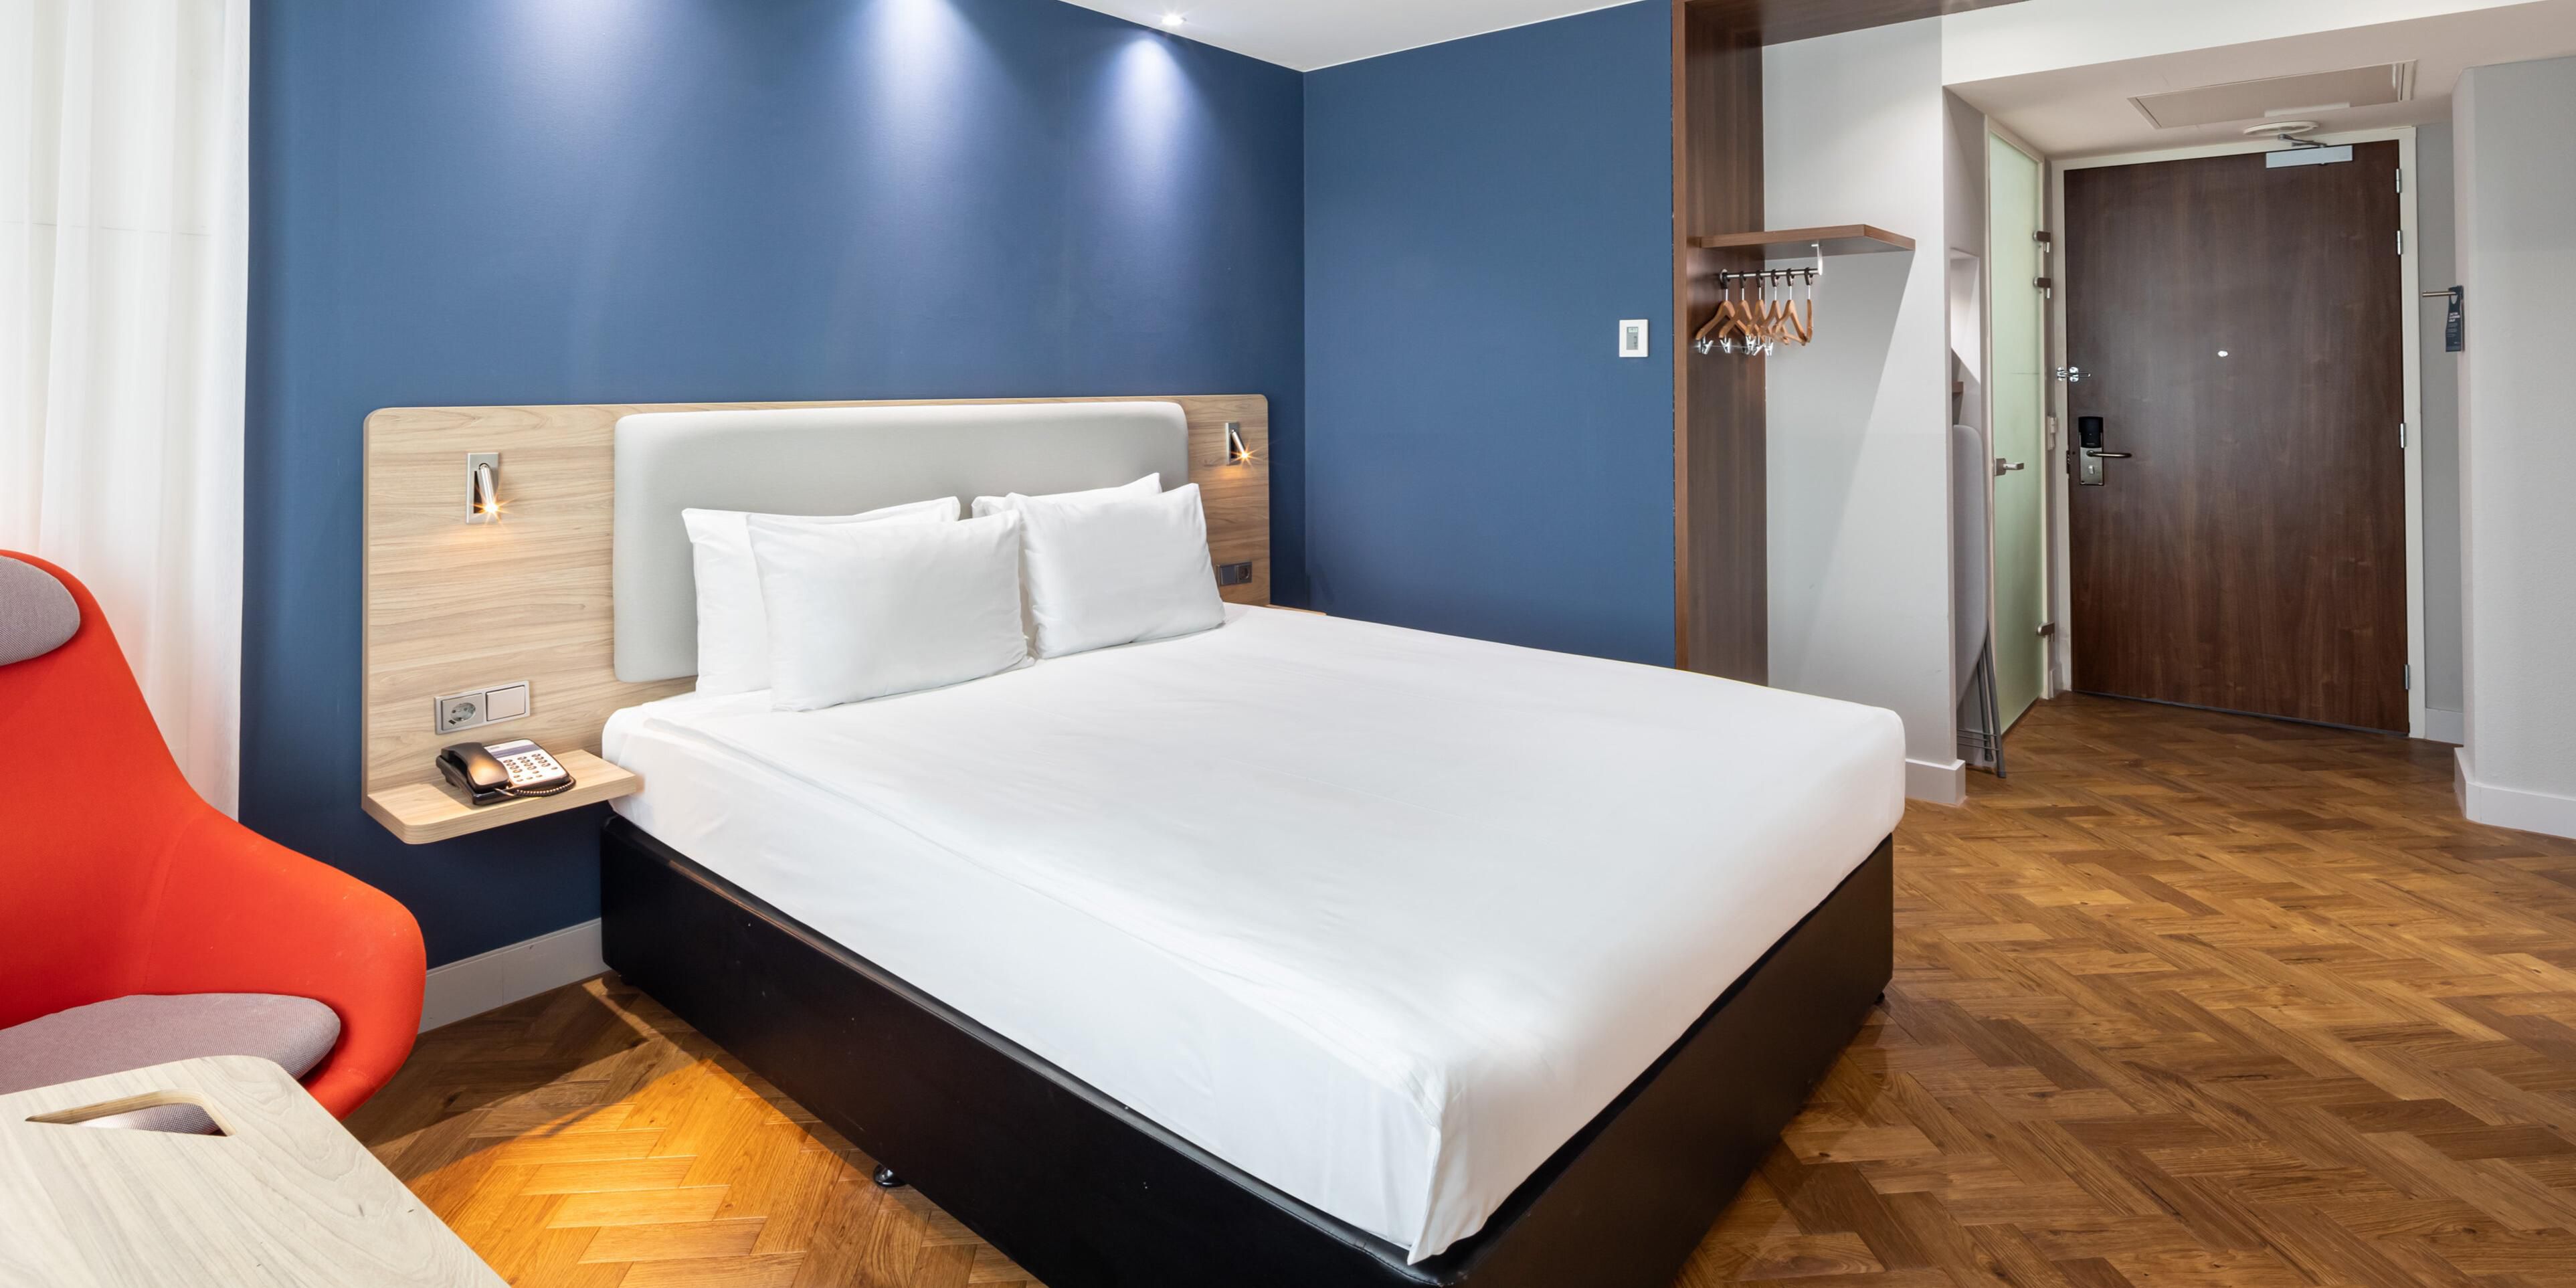 Decorated with blonde-wood accents and dashes of red, the hotel’s 7th floor Scandinavian-inspired rooms include air-conditioning, power showers and high-quality beds. Business Guest Rooms pair a table with a flexible work chair.